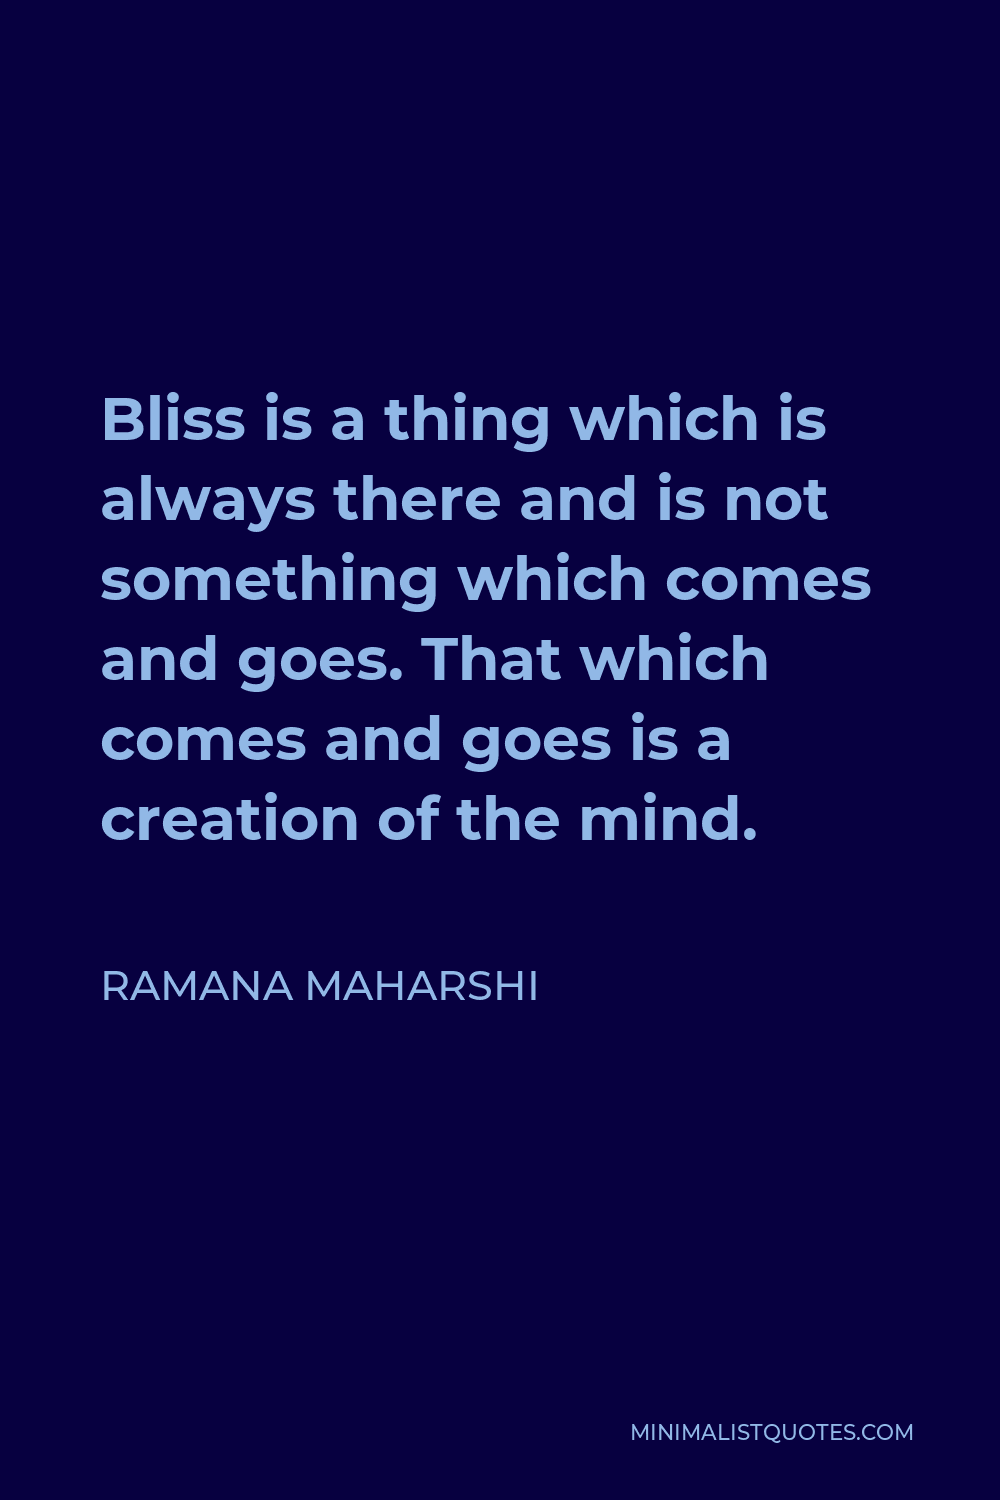 Ramana Maharshi Quote - Bliss is a thing which is always there and is not something which comes and goes. That which comes and goes is a creation of the mind.